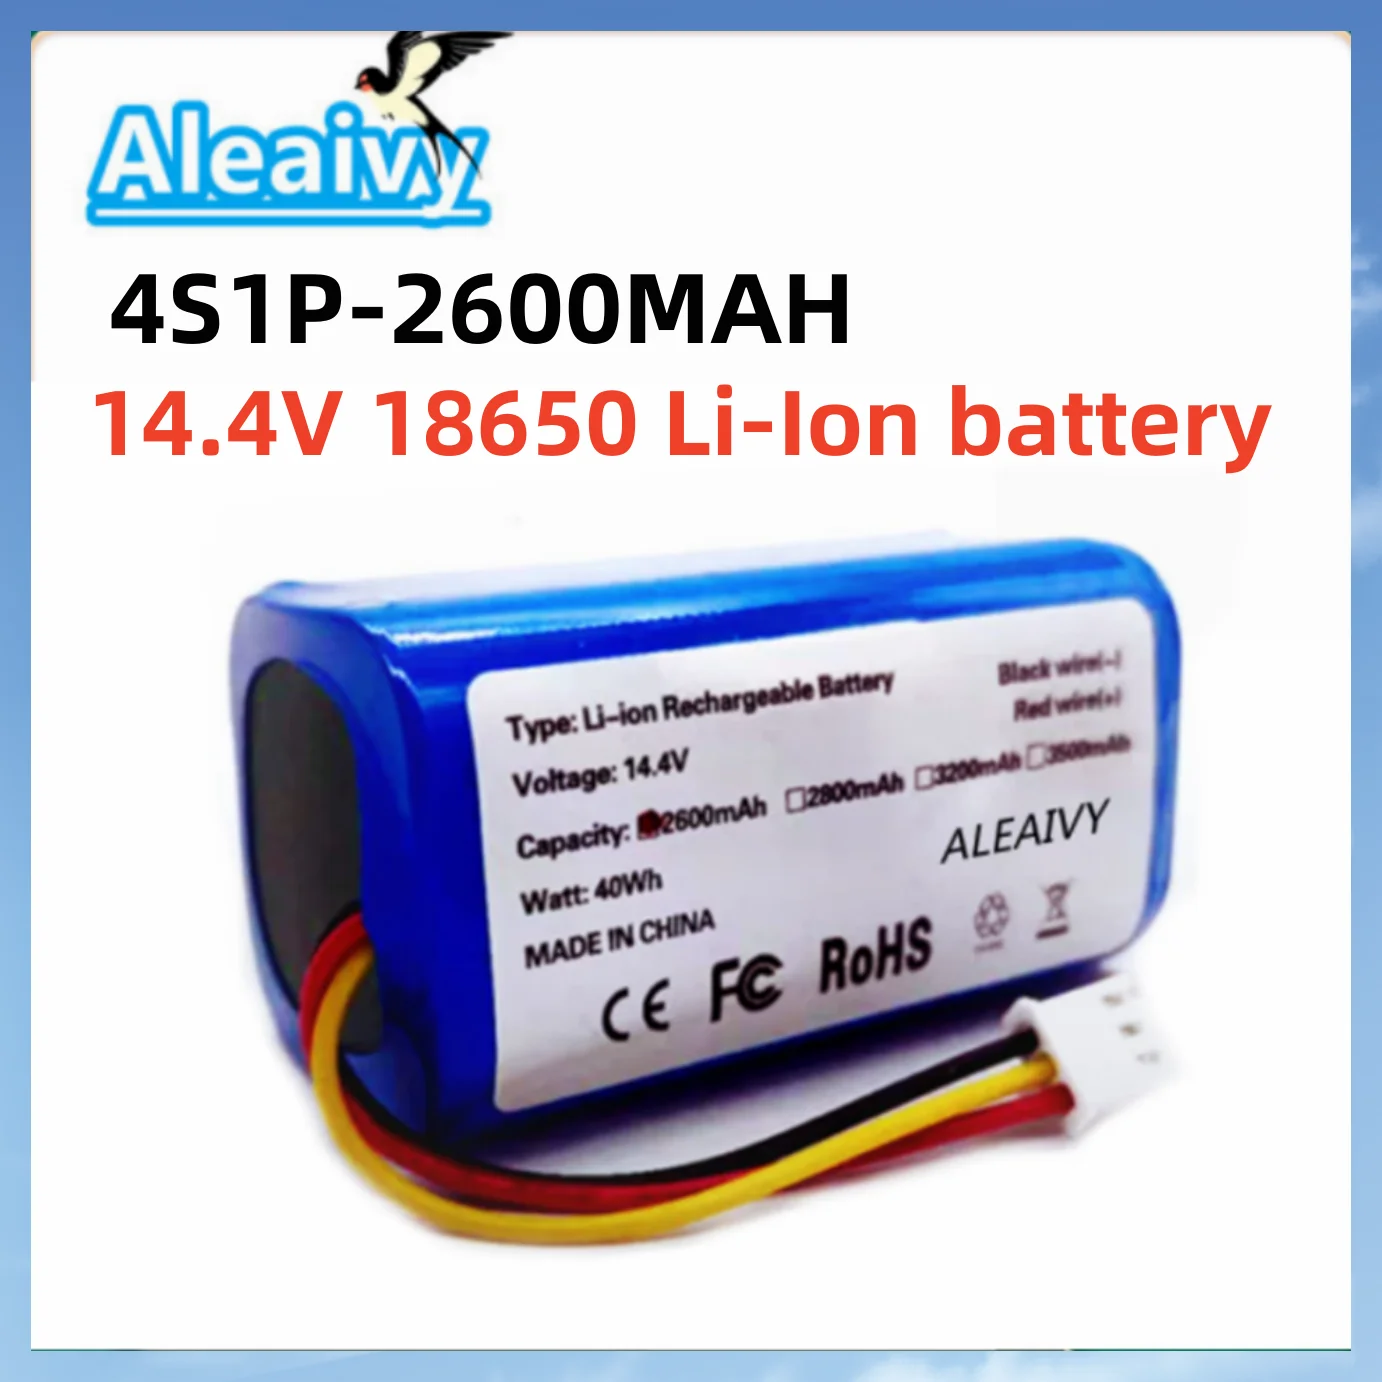 

18650 14.4v 2600mAh Original Battery for LIECTROUX C30B E30 Robot Vacuum Cleaner, High Quality Lithium Cell,Cleaning Tool Part